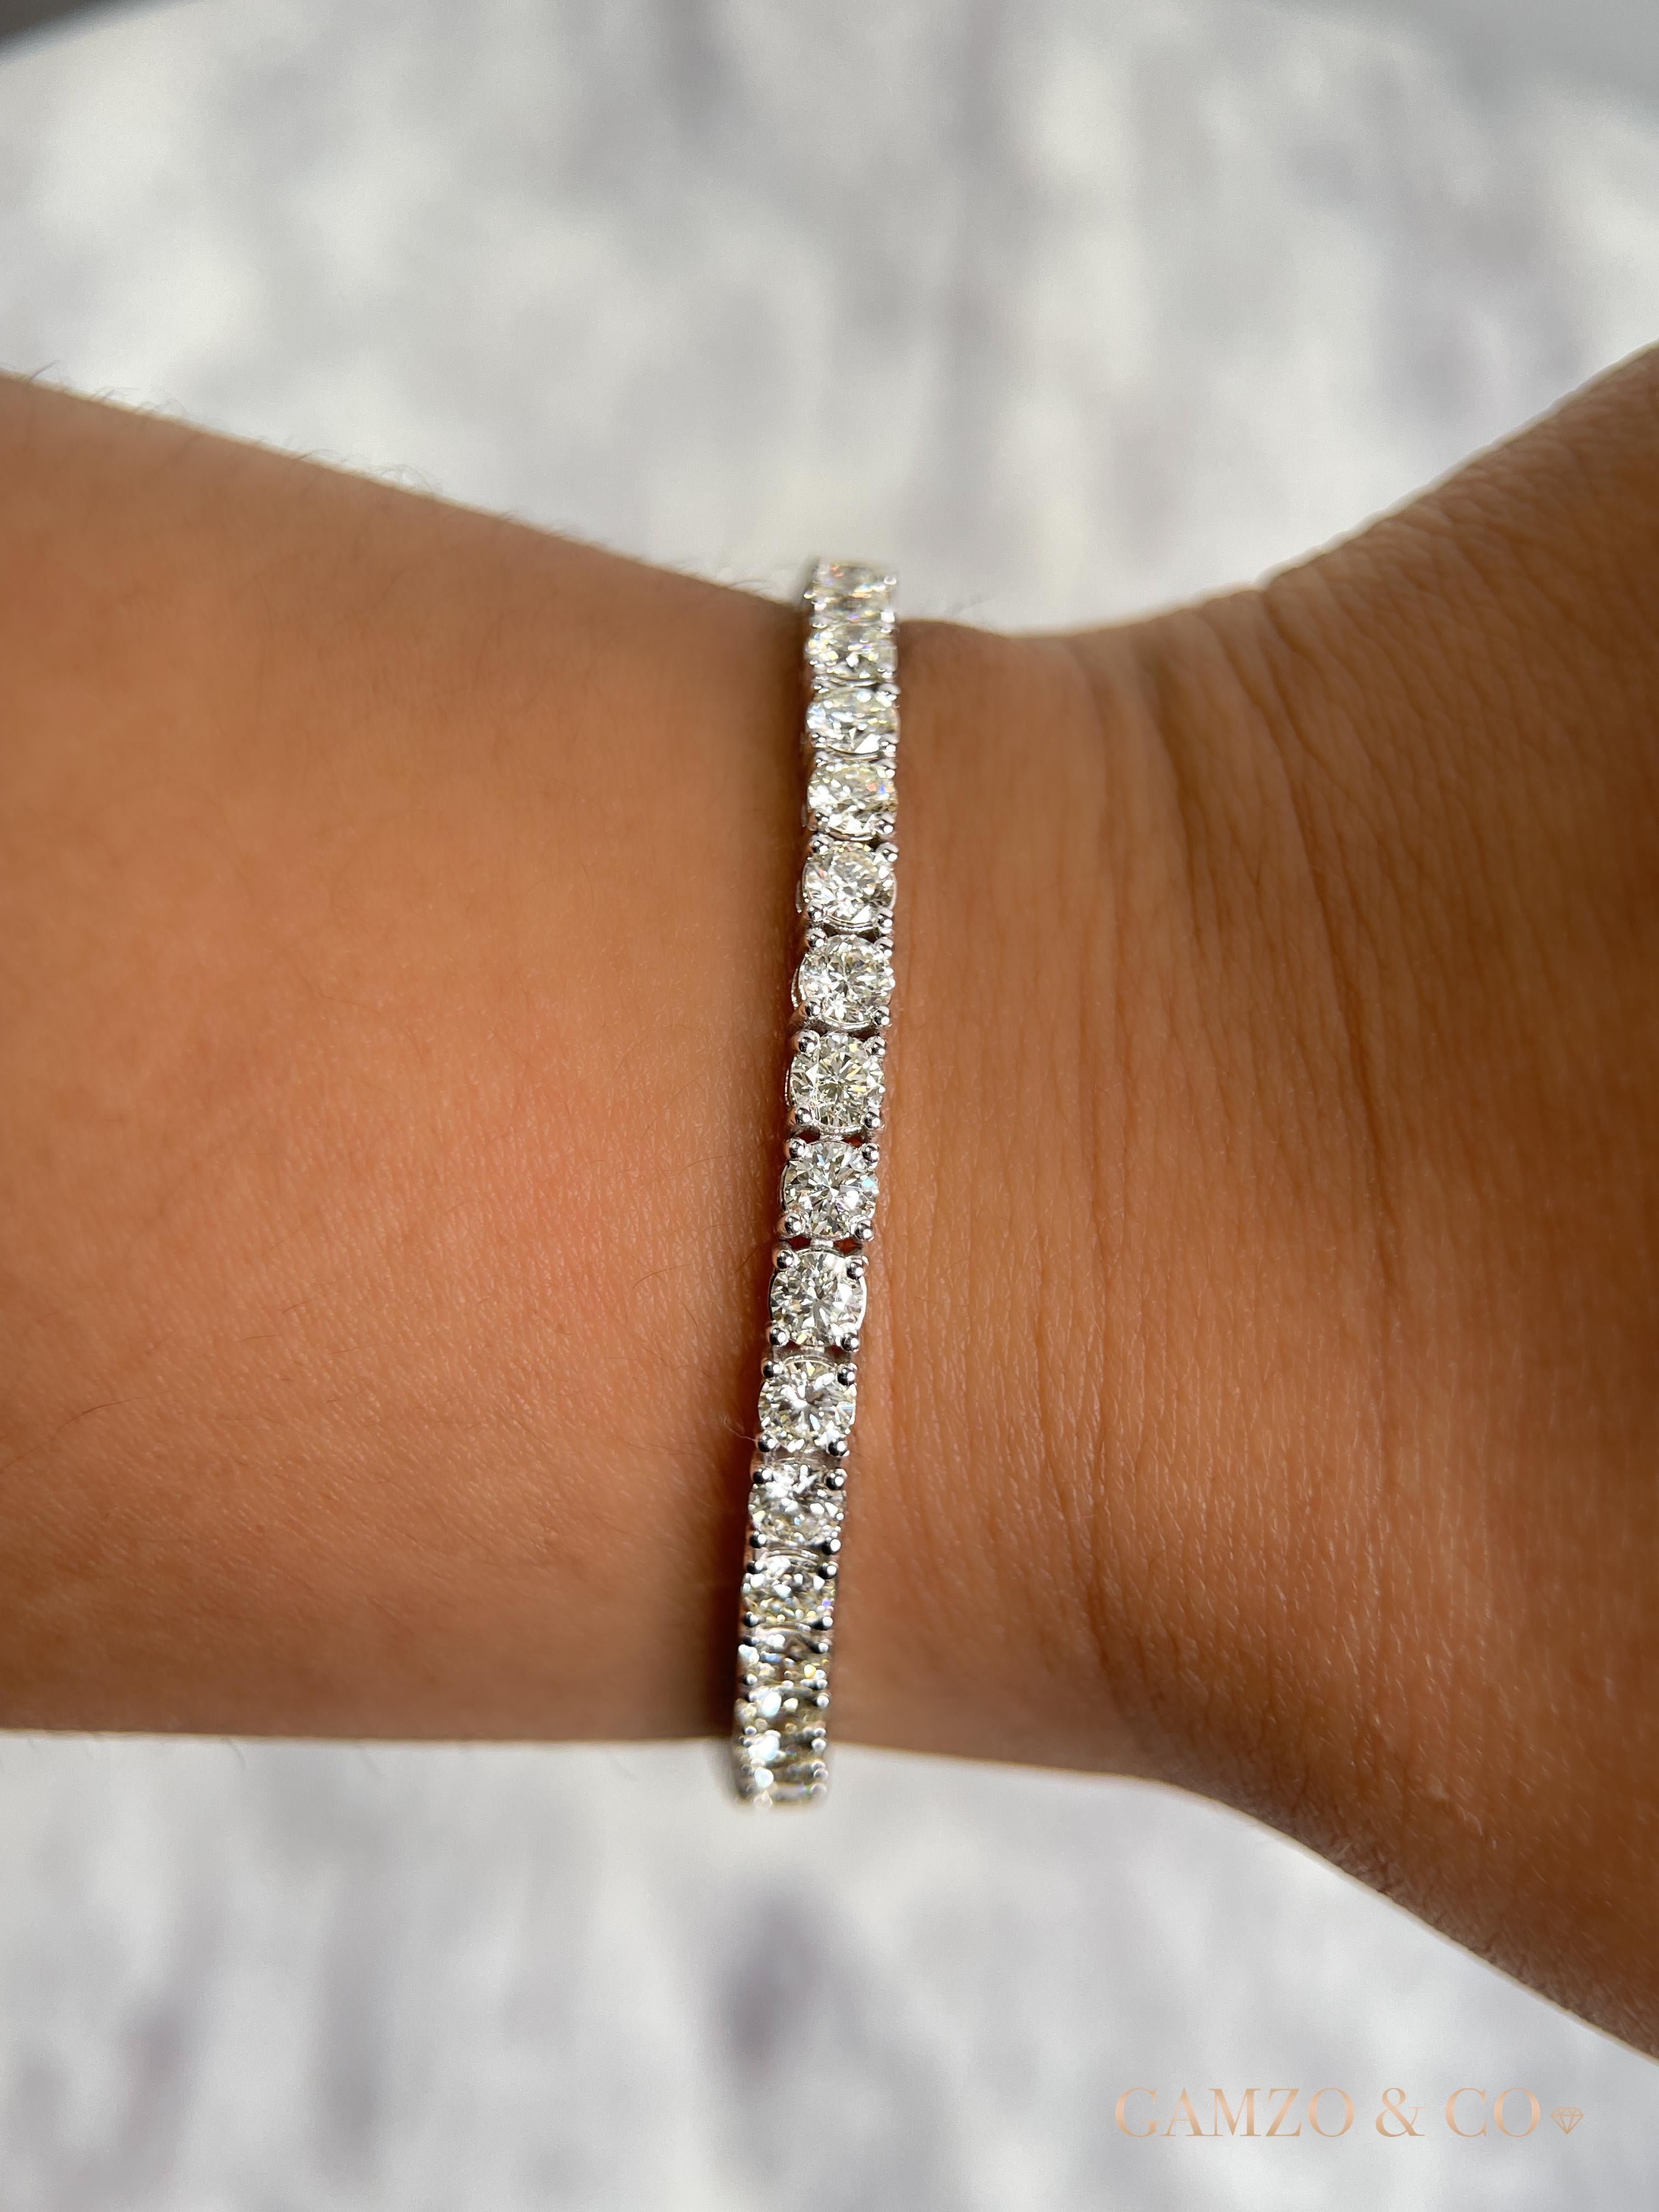 This diamond tennis bracelet features beautifully cut round diamonds set gorgeously in 14k gold.

Metal: 14k Gold
Diamond Cut: Round Natural Diamond 
Total Diamond Carats: 9ct
Diamond Clarity: VS
Diamond Color: F-G
Color: Rose Gold
Bracelet Length: